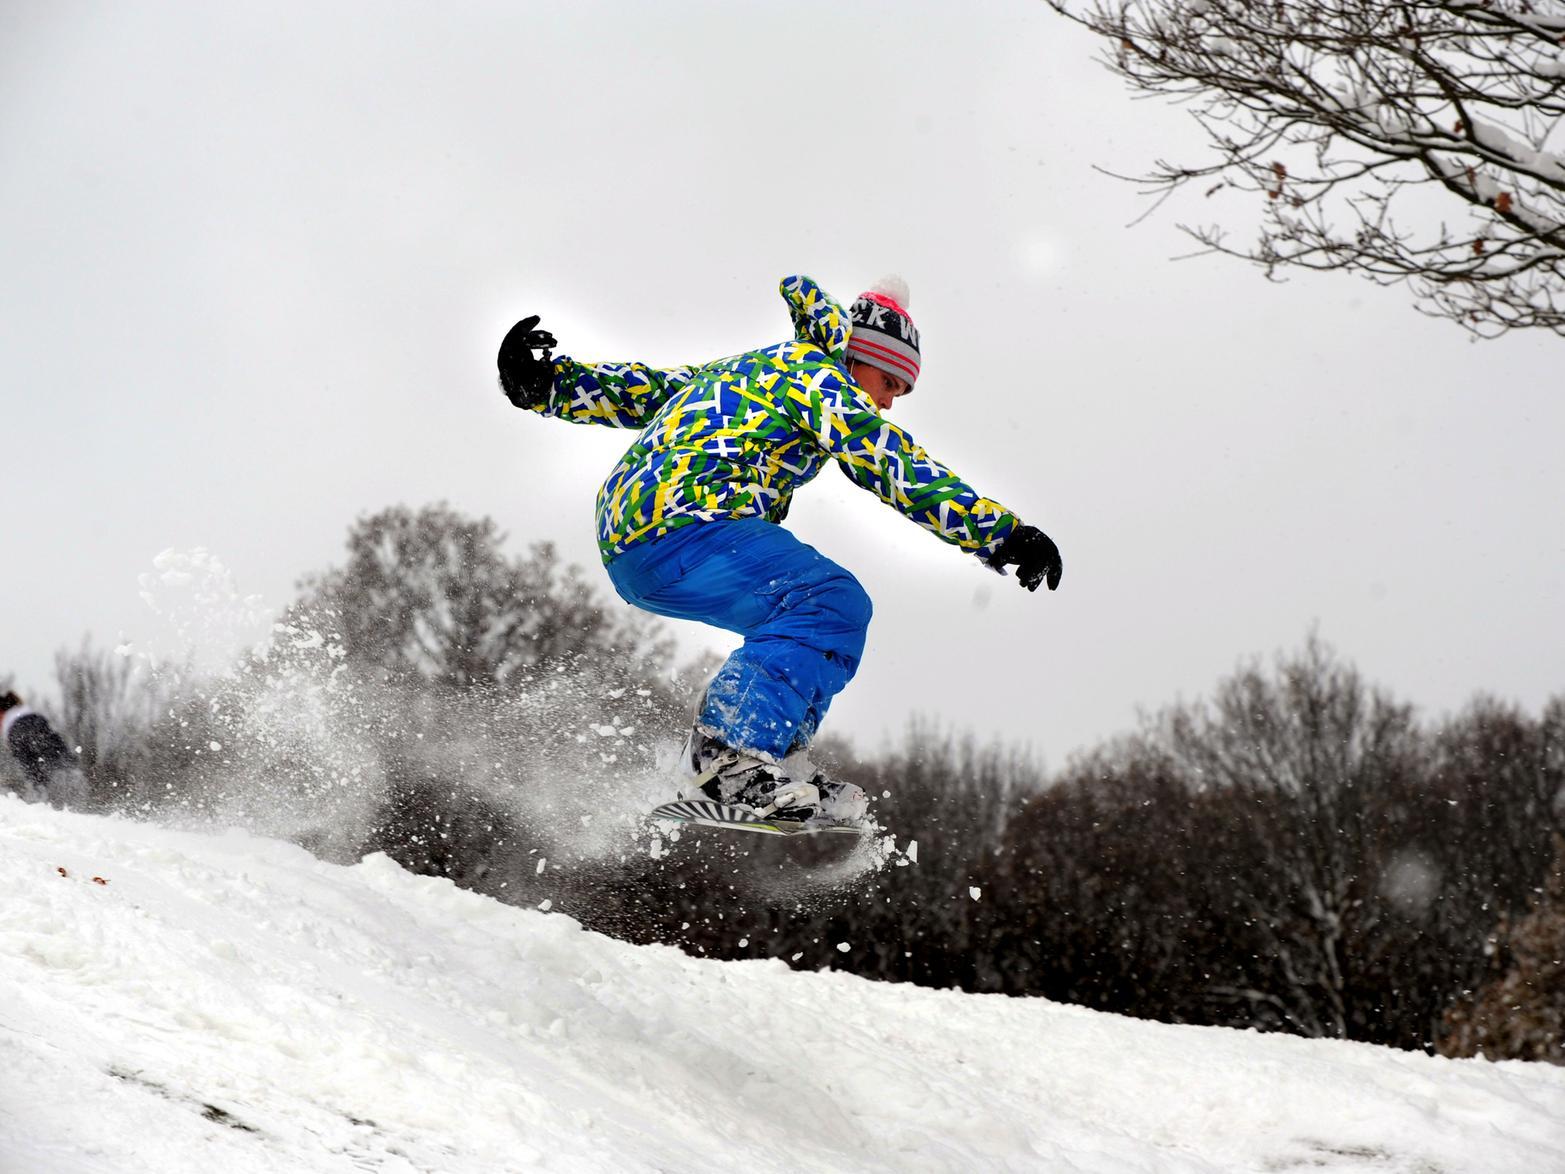 The heavy snow provided an opportunity for thrill seekers. This is Chris Cullen practising his snowboarding.